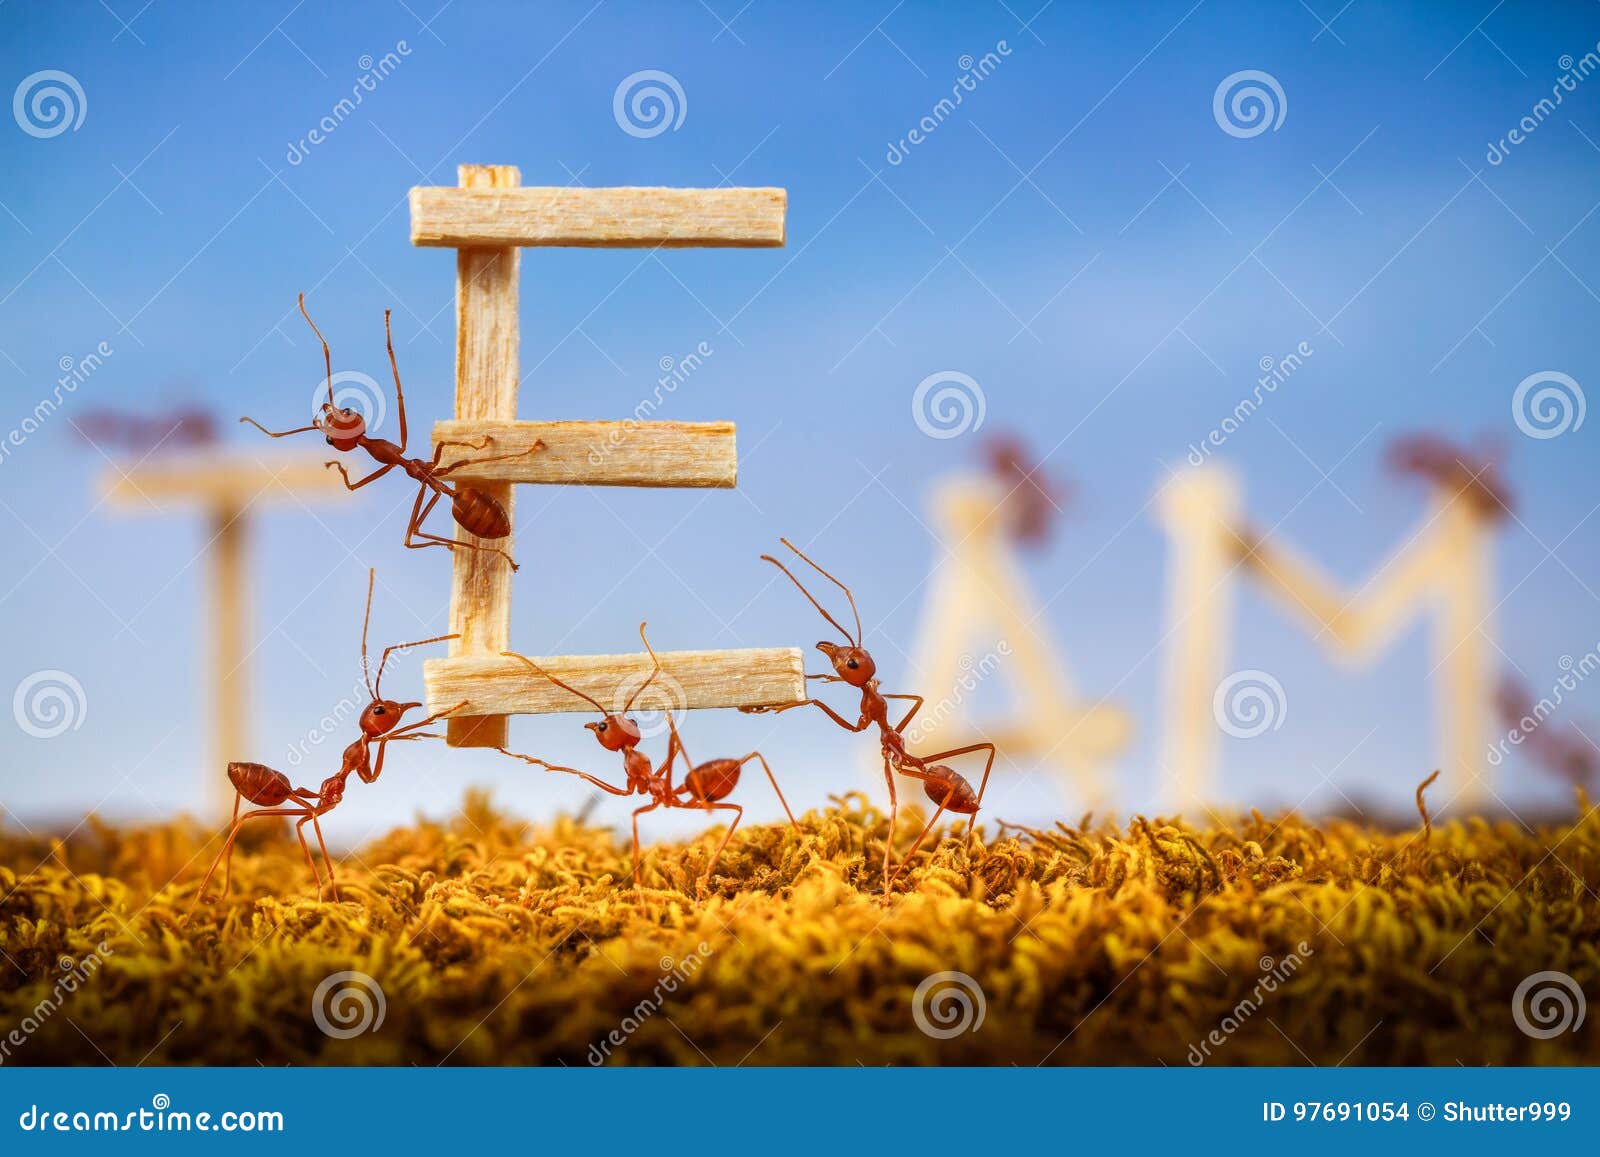 ants carrying wording team